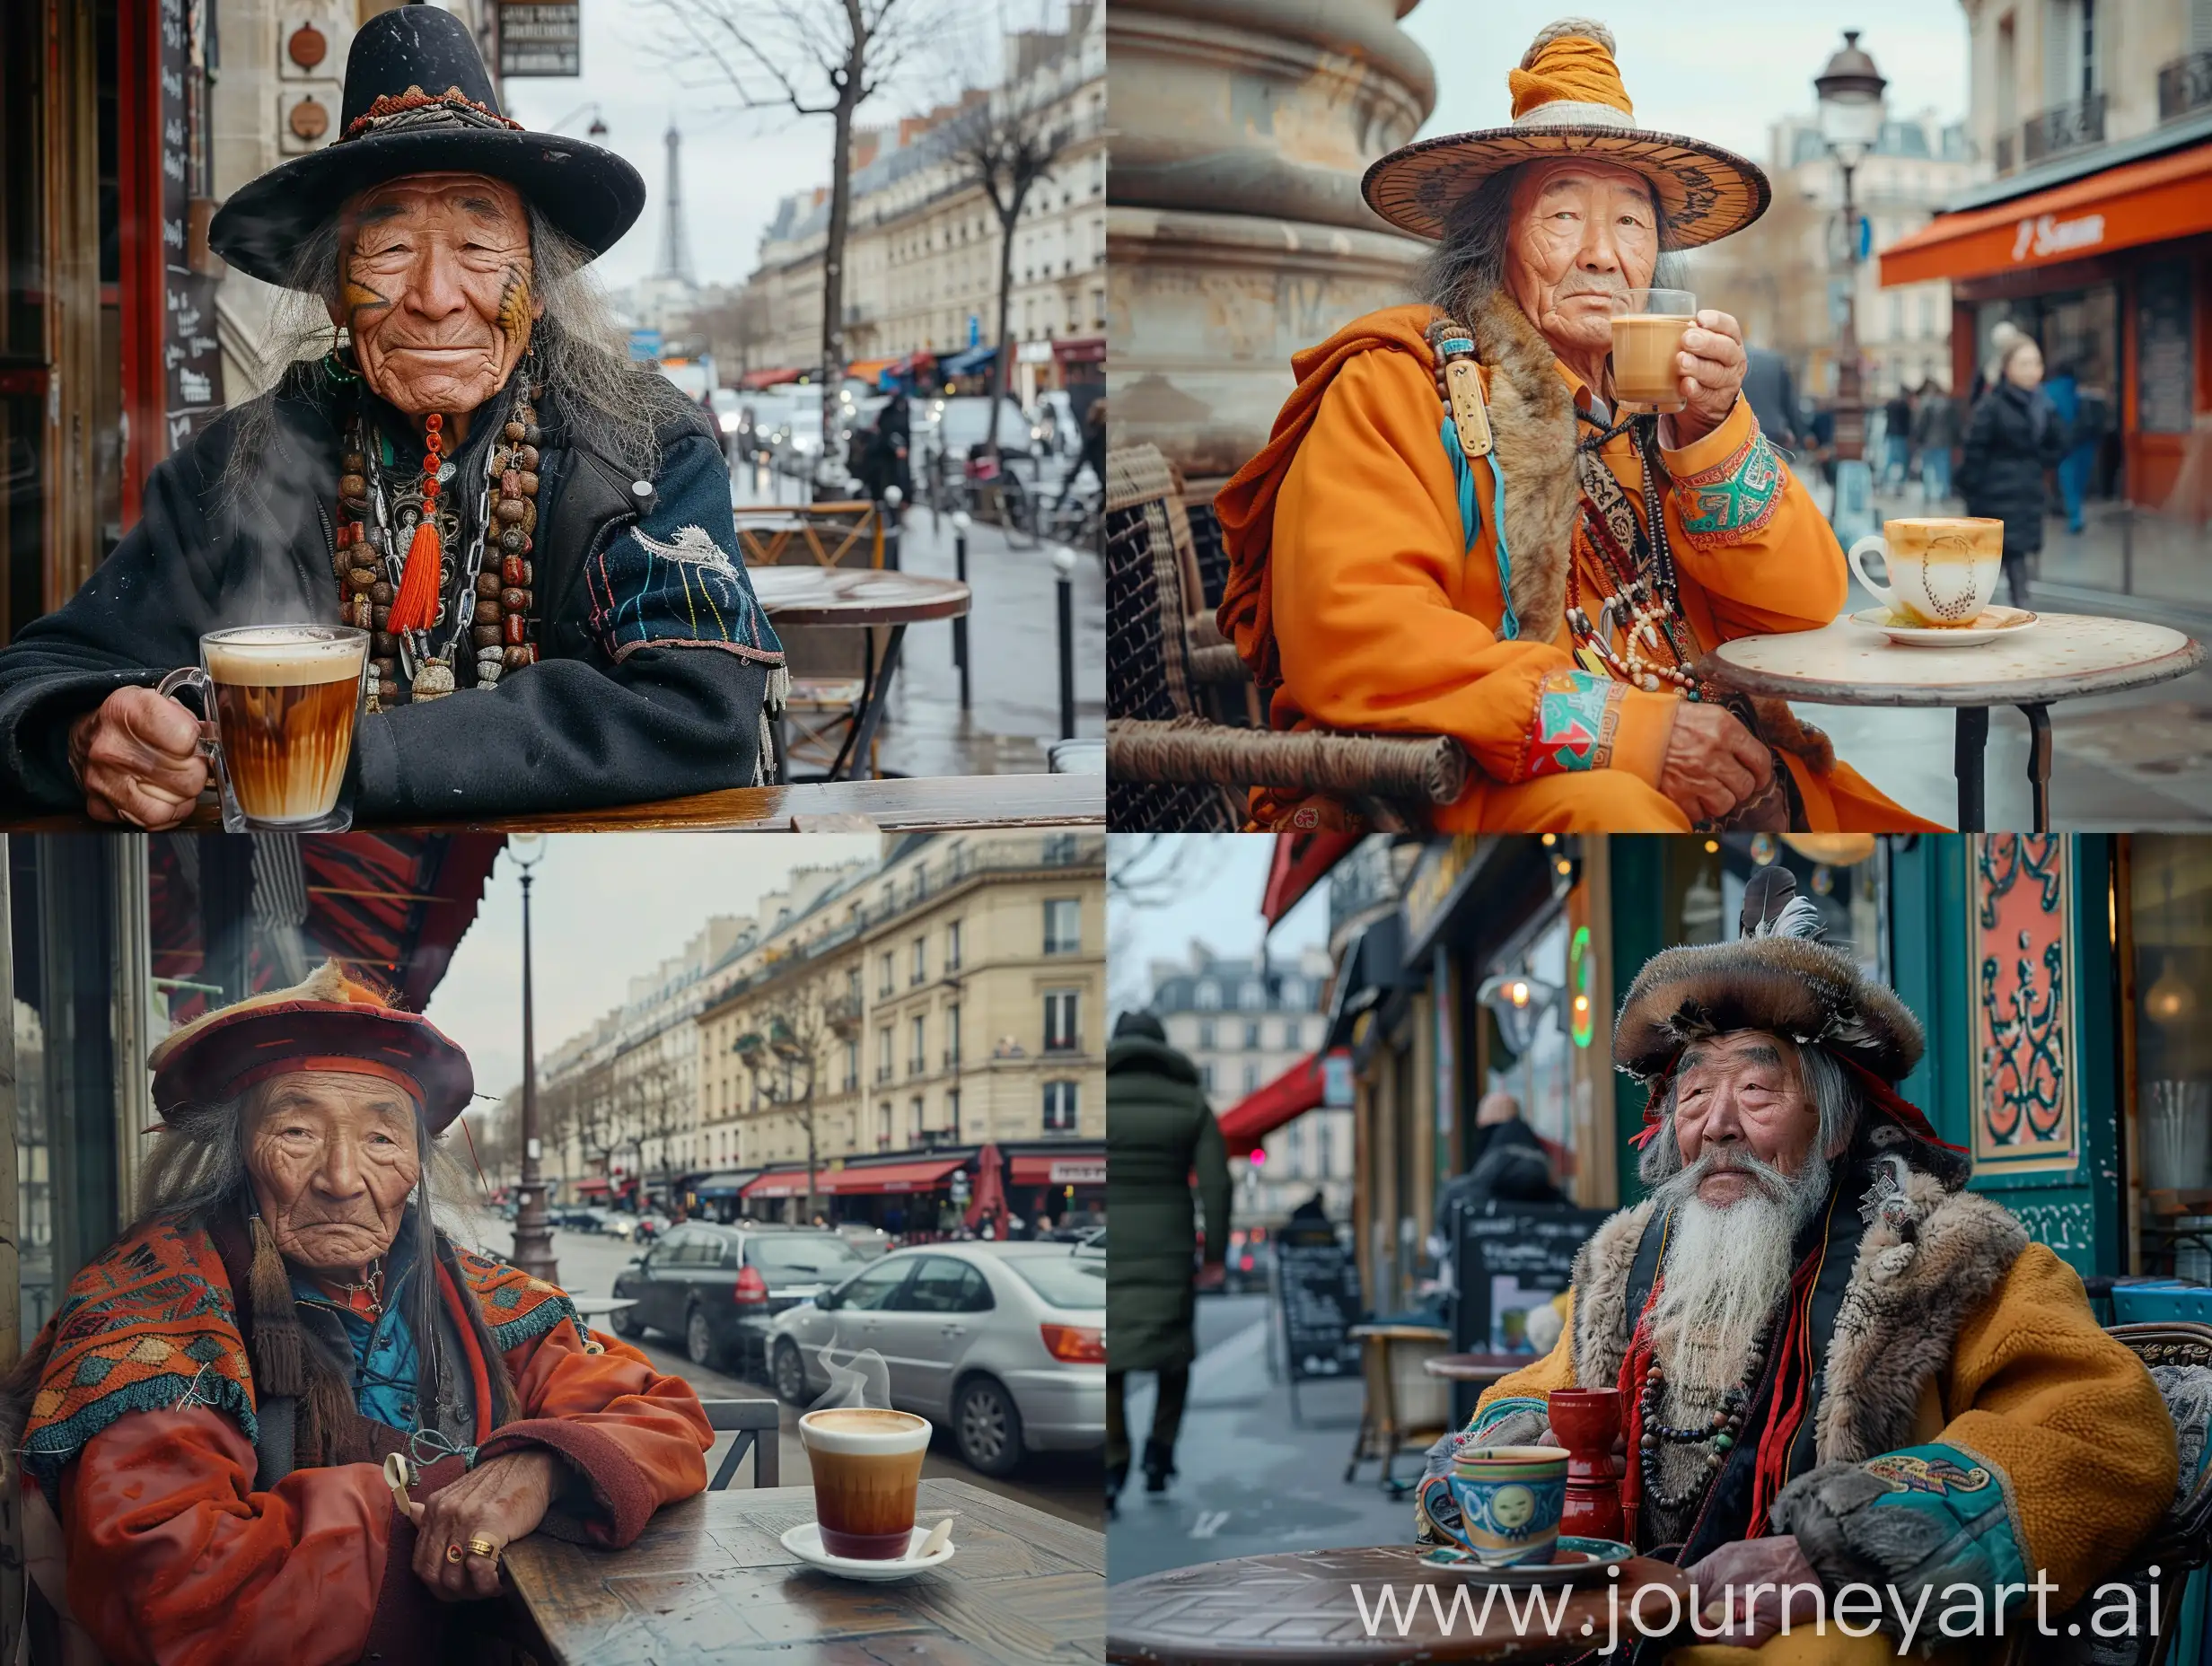 A mongolian shaman is visiting Paris, sitting on the terrace of a parisian cafeteria, drinking hot coffee and enjoying a good morning, a prize-winning photo